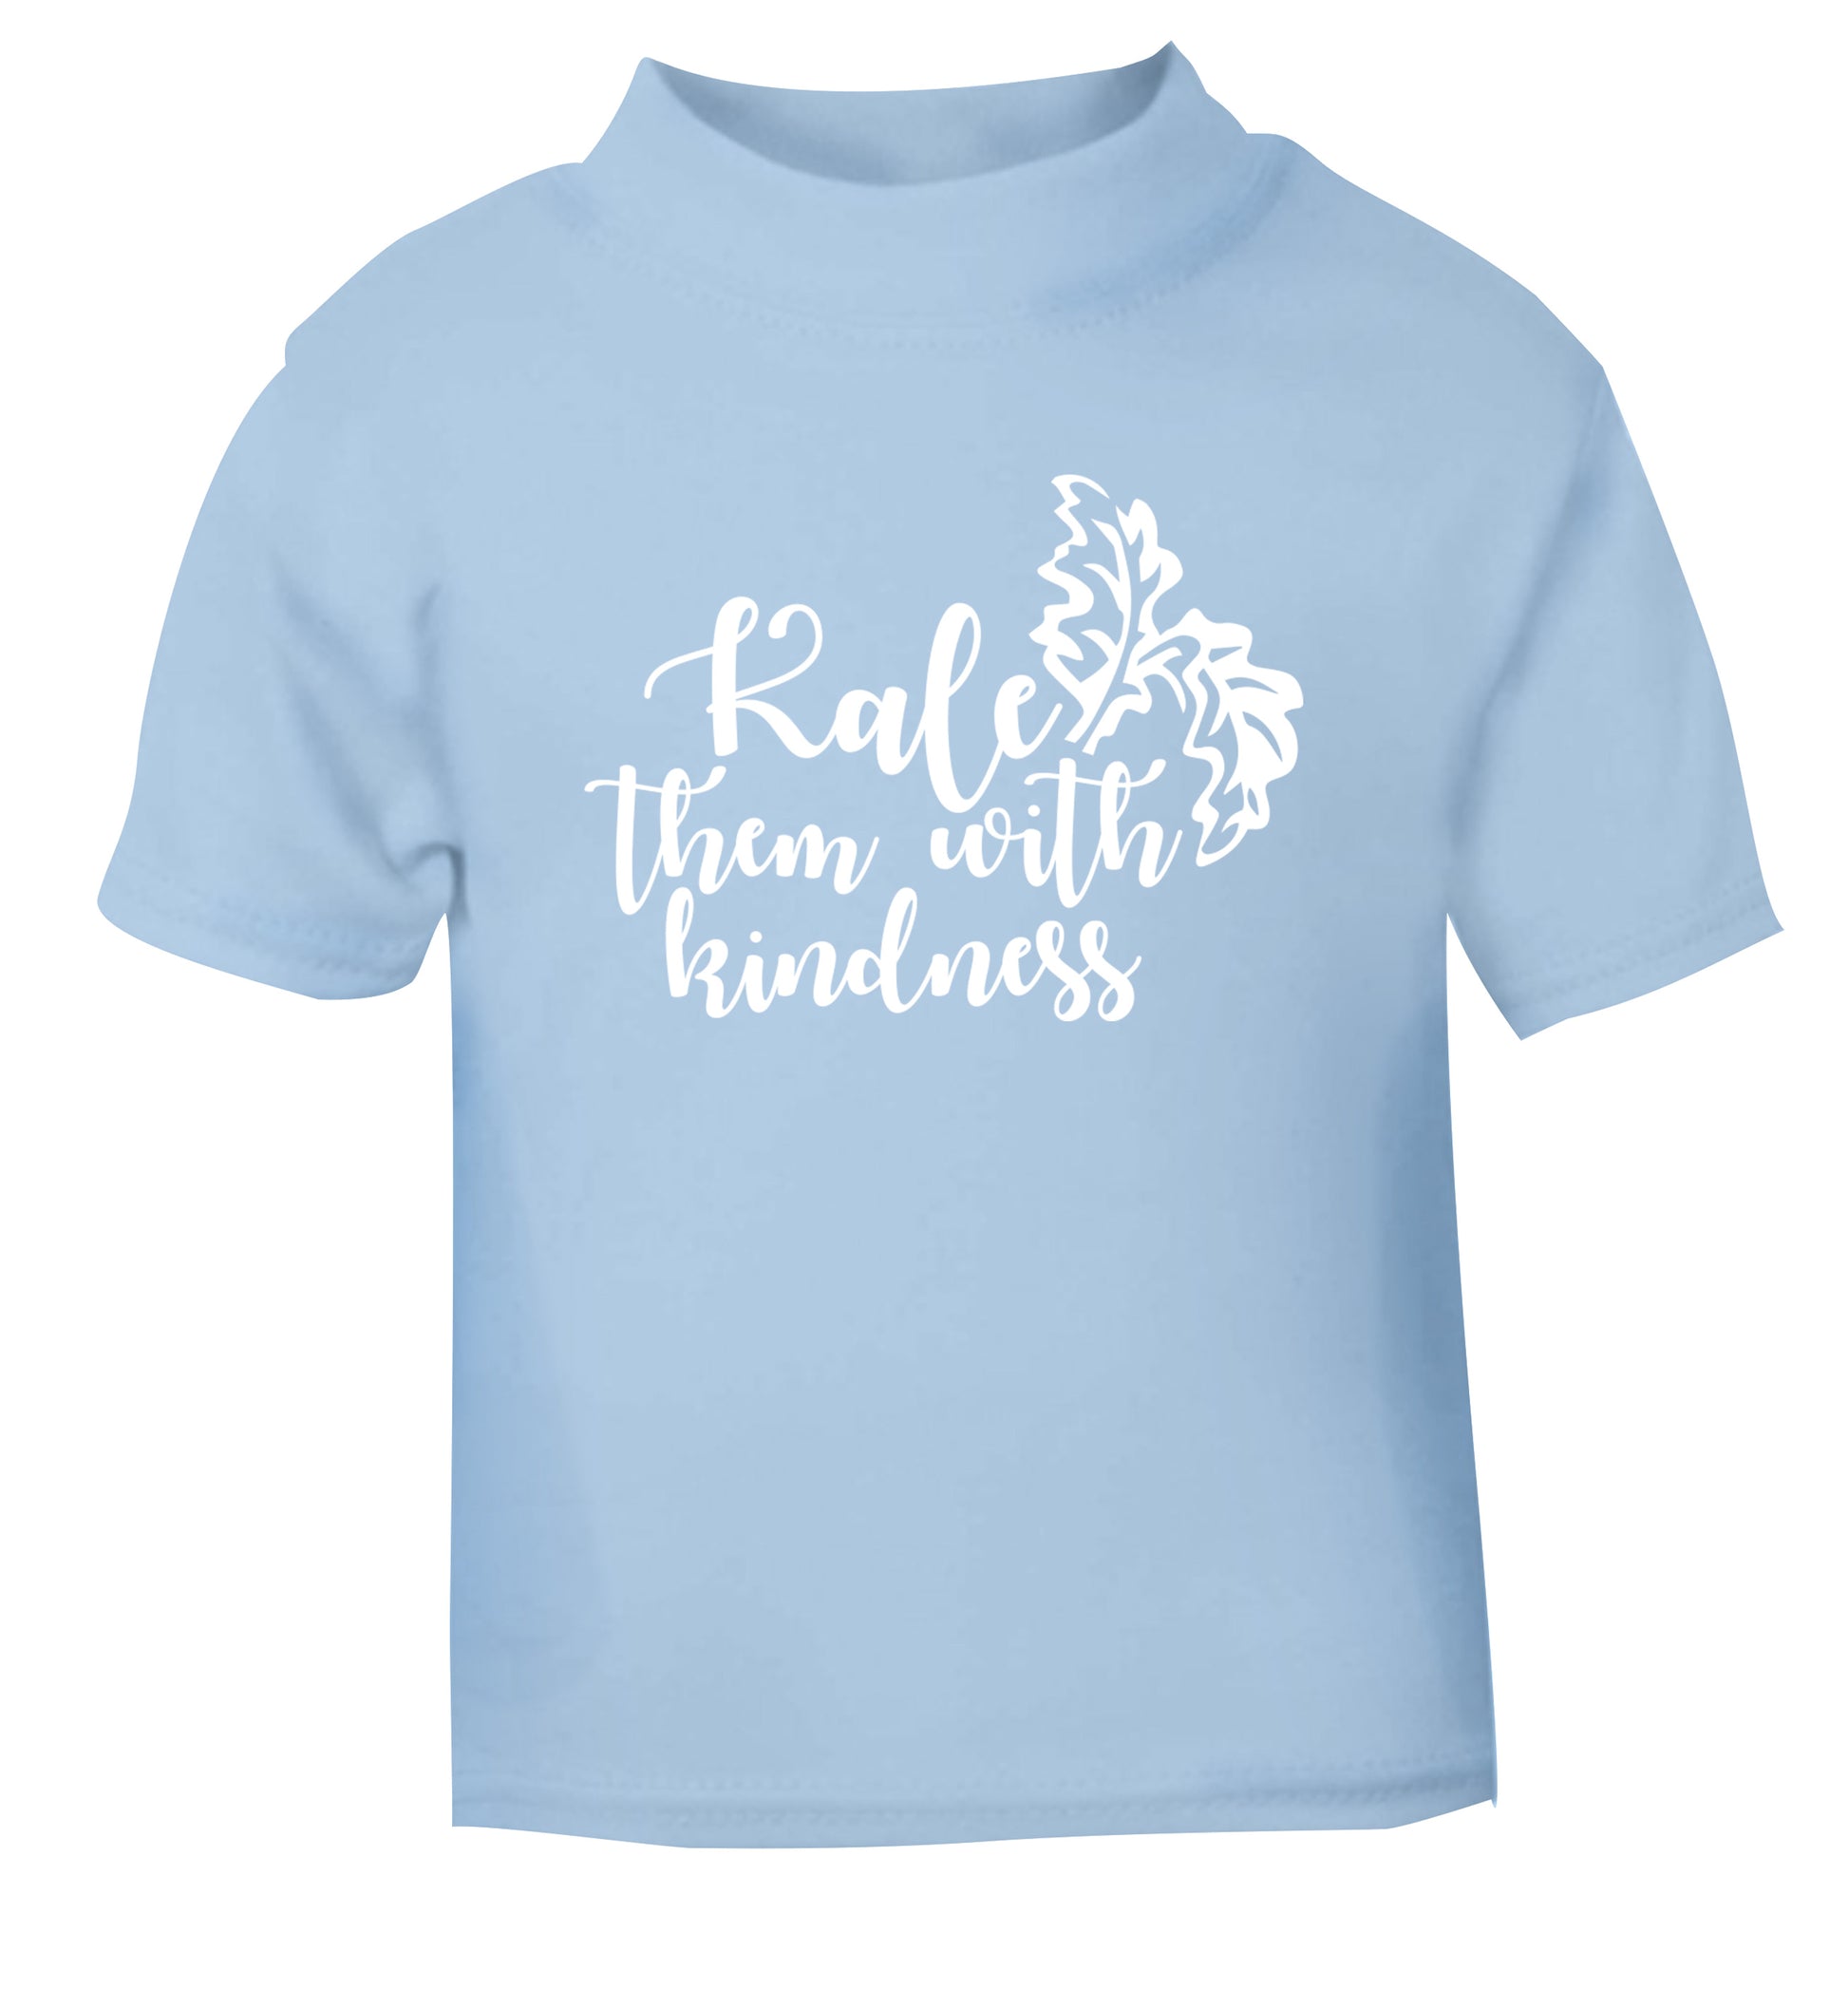 Kale them with kindness light blue Baby Toddler Tshirt 2 Years